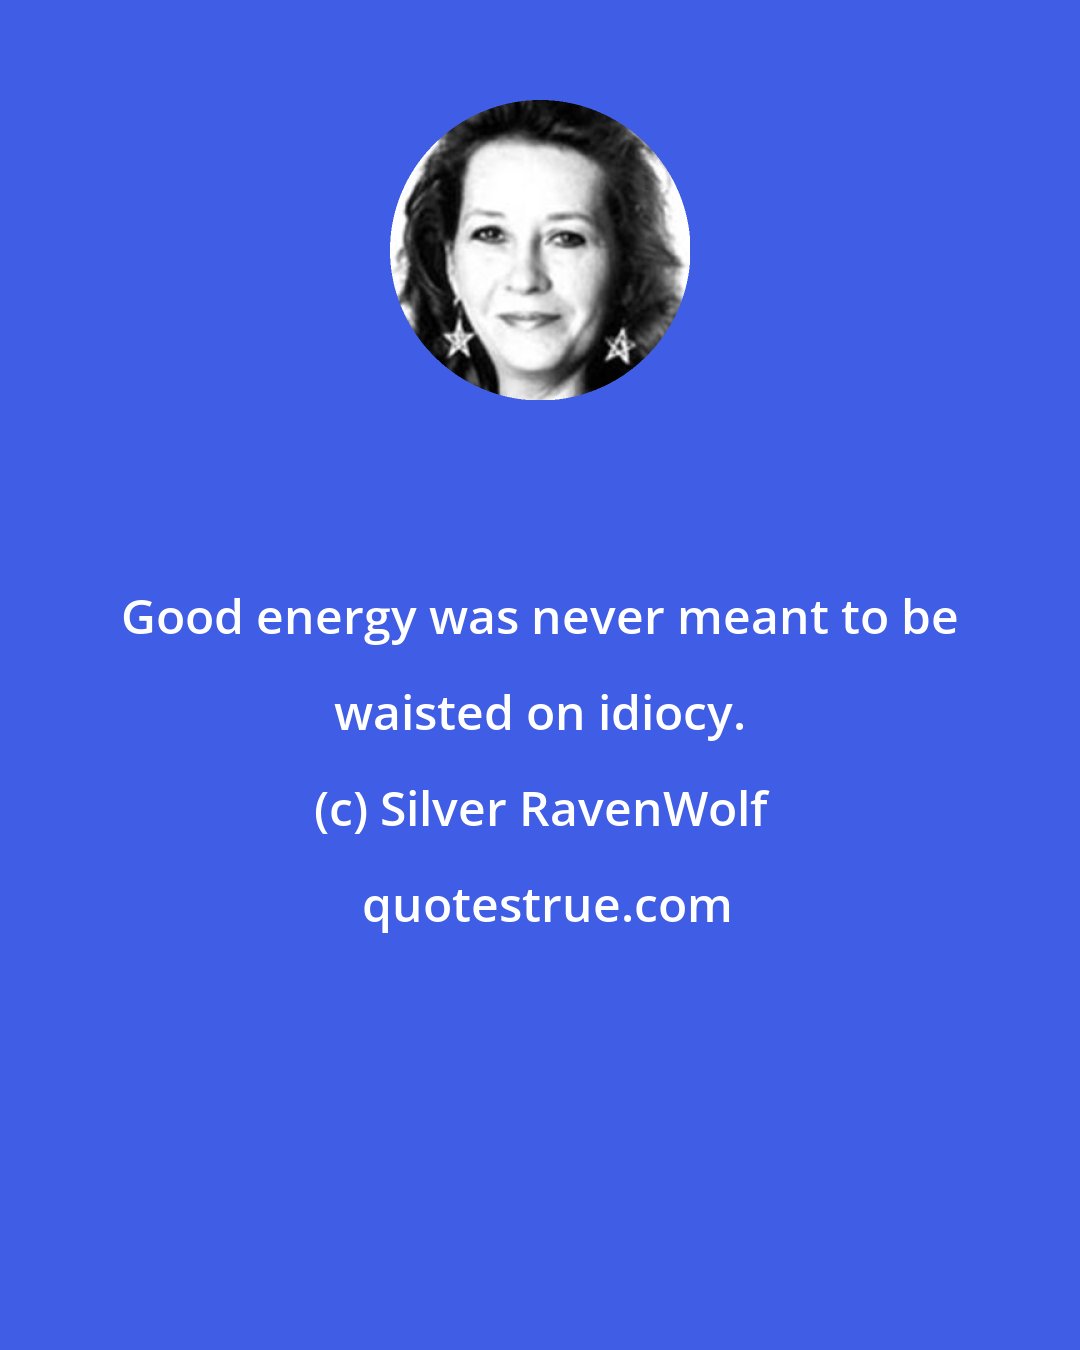 Silver RavenWolf: Good energy was never meant to be waisted on idiocy.